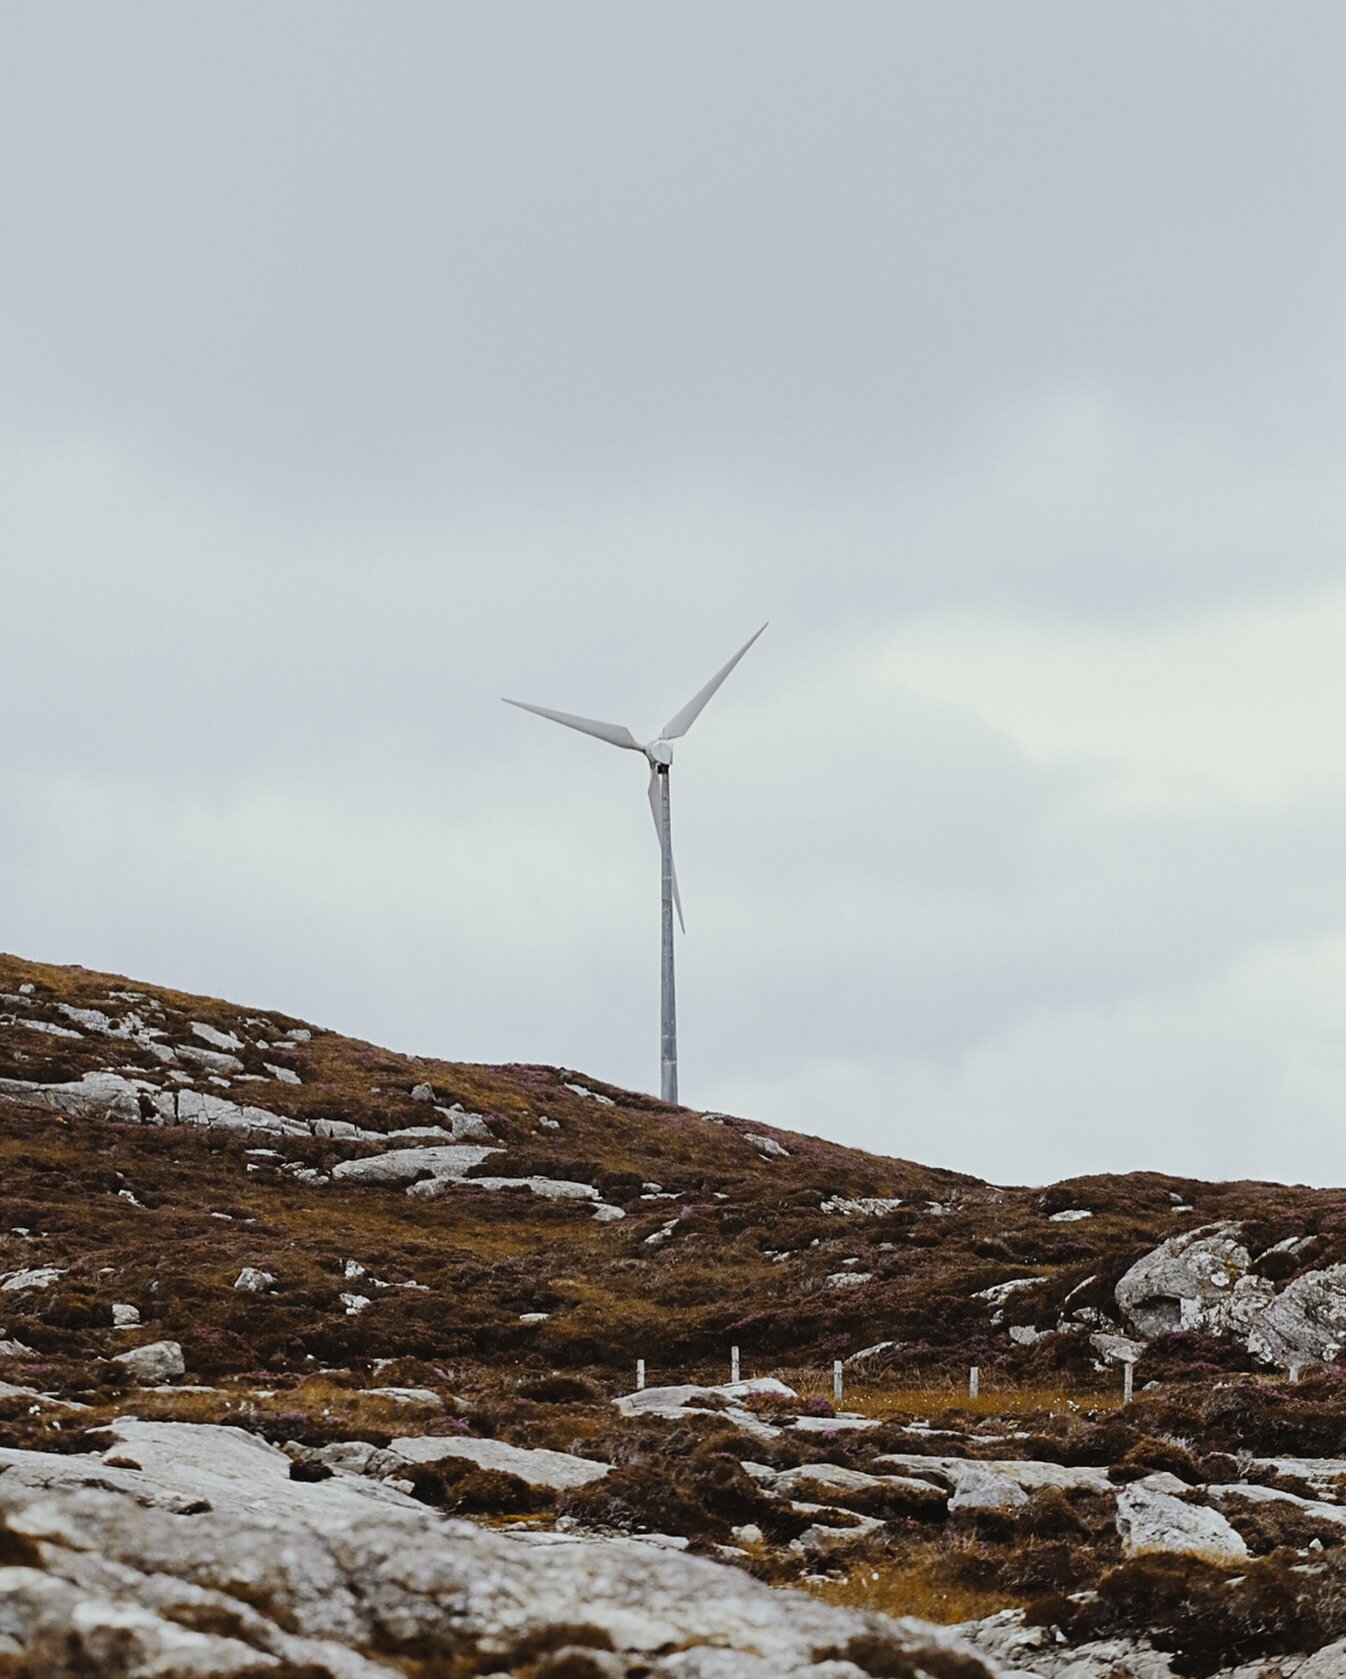 💨 In the vast baron landscape, a lone wind turbine emerges, harnessing the power of the unseen. 🌬️⚙️

Will have been making loads of renewable energy this Christmas that&rsquo;s for sure. 

#LandscapePhotography
#ScotlandScenery
#RoadTripAdventures